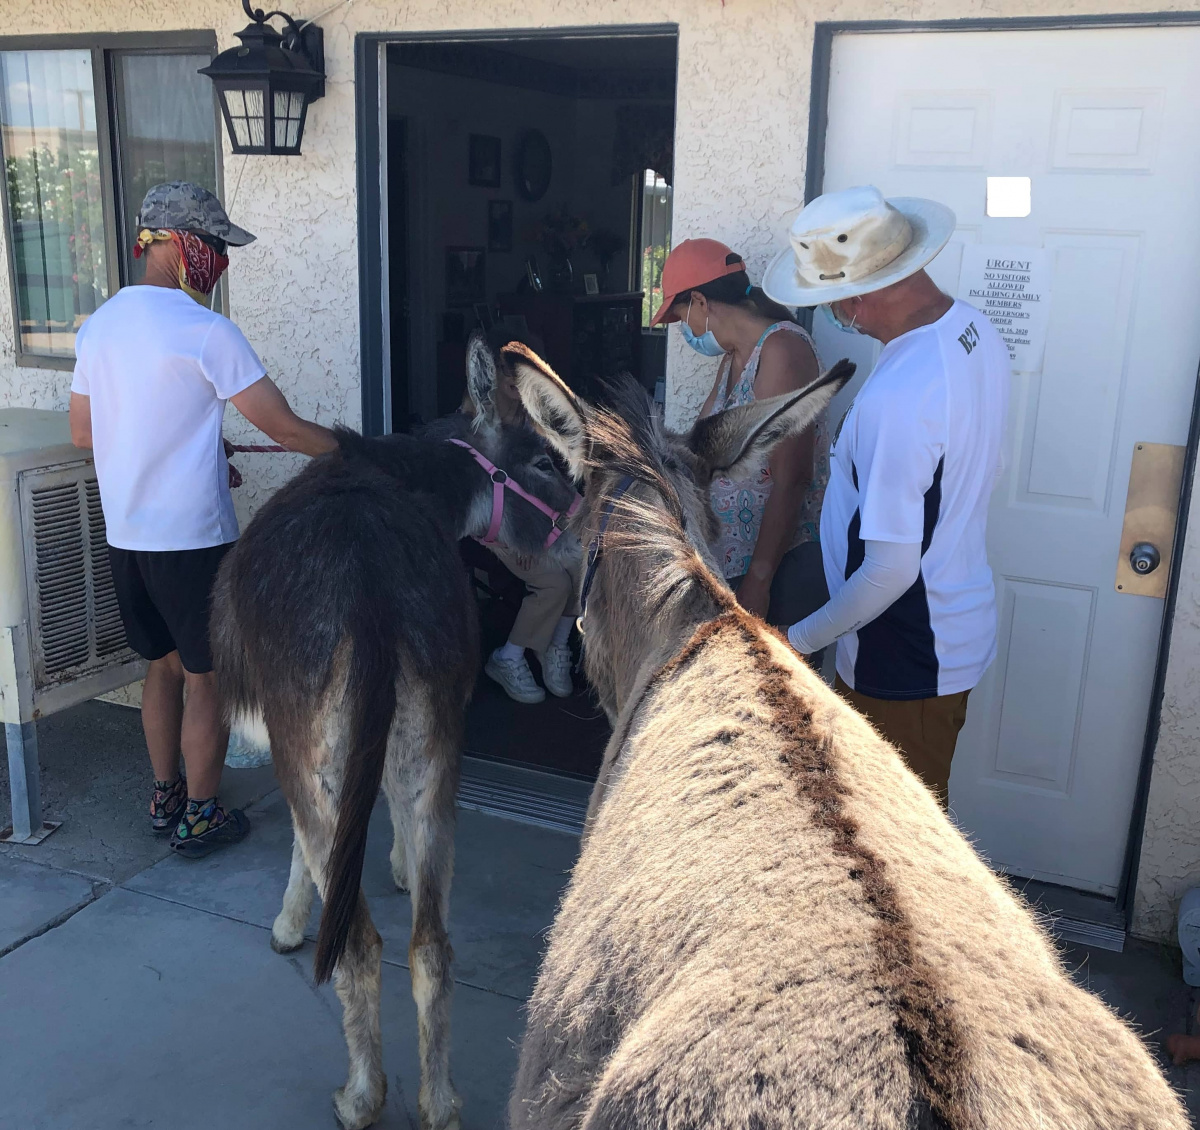 Burros being led into a facility. 